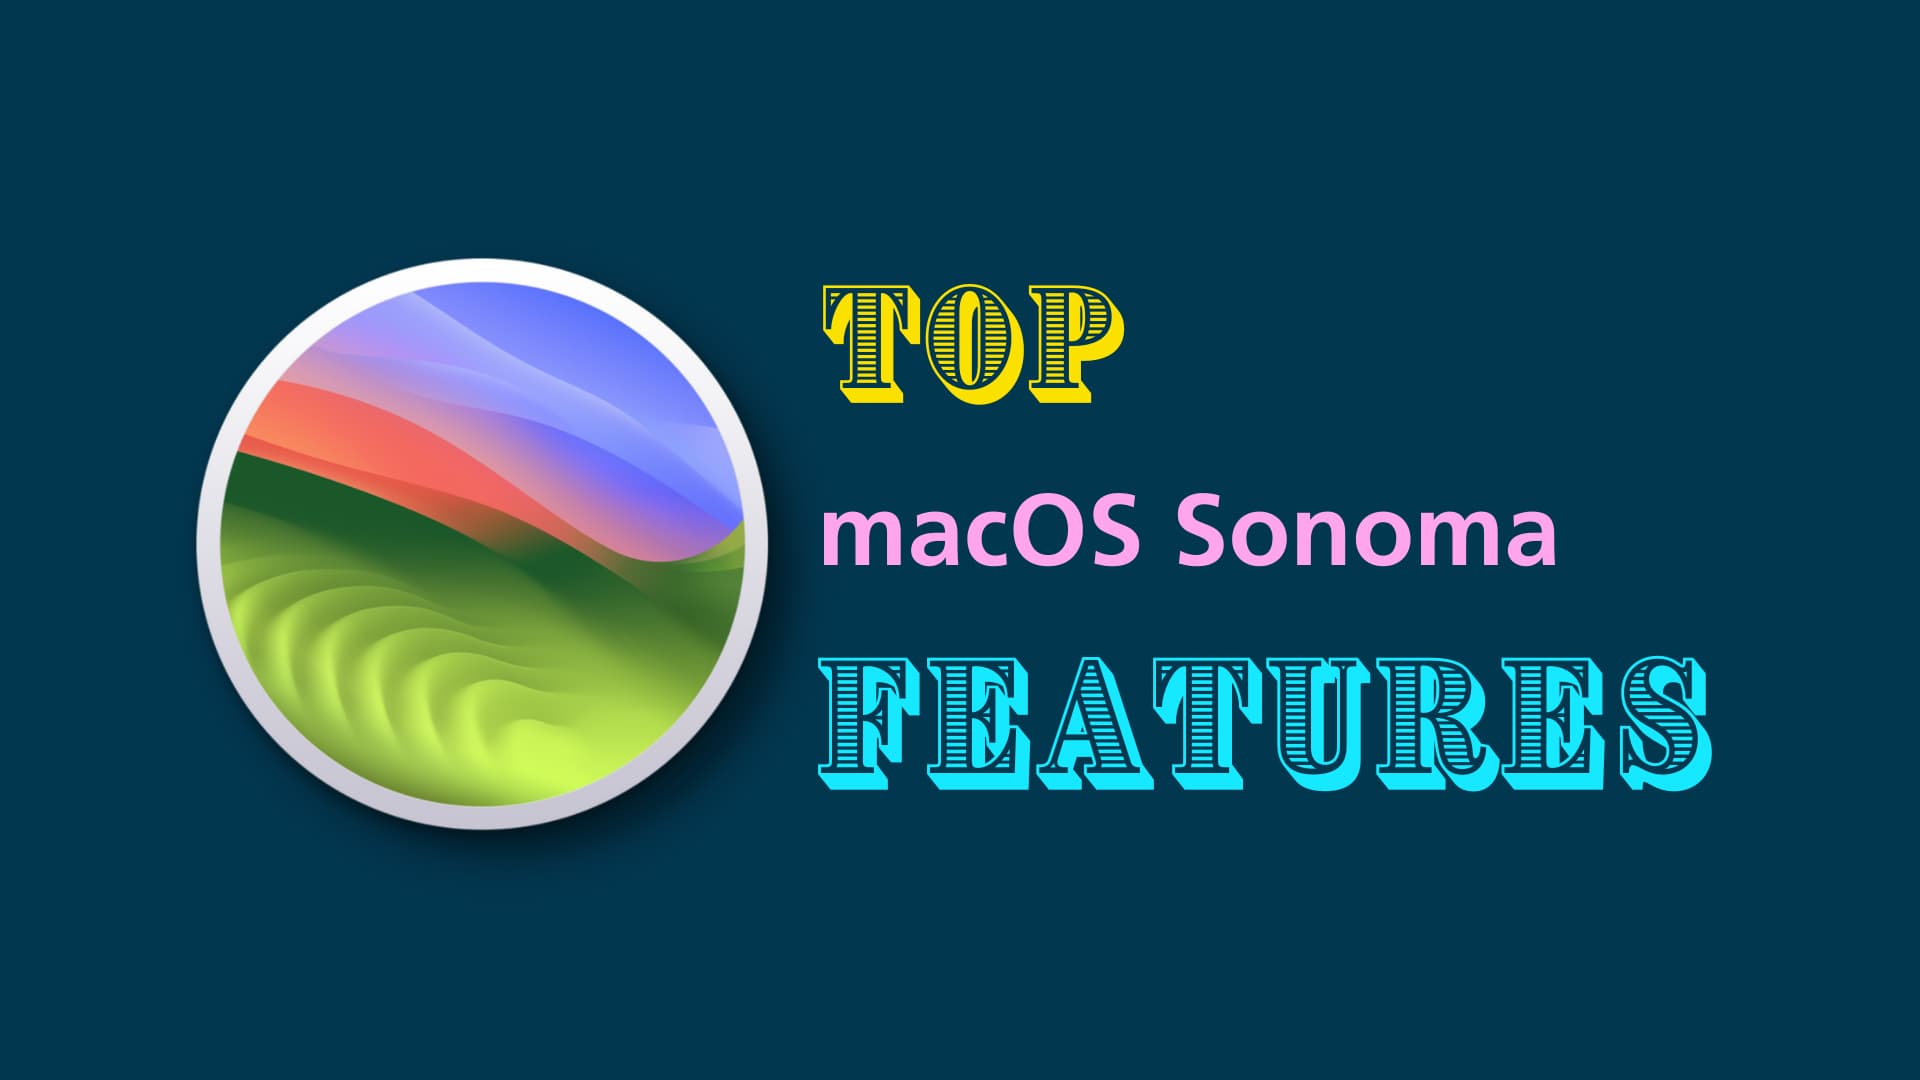 Top macOS Sonoma features for Mac